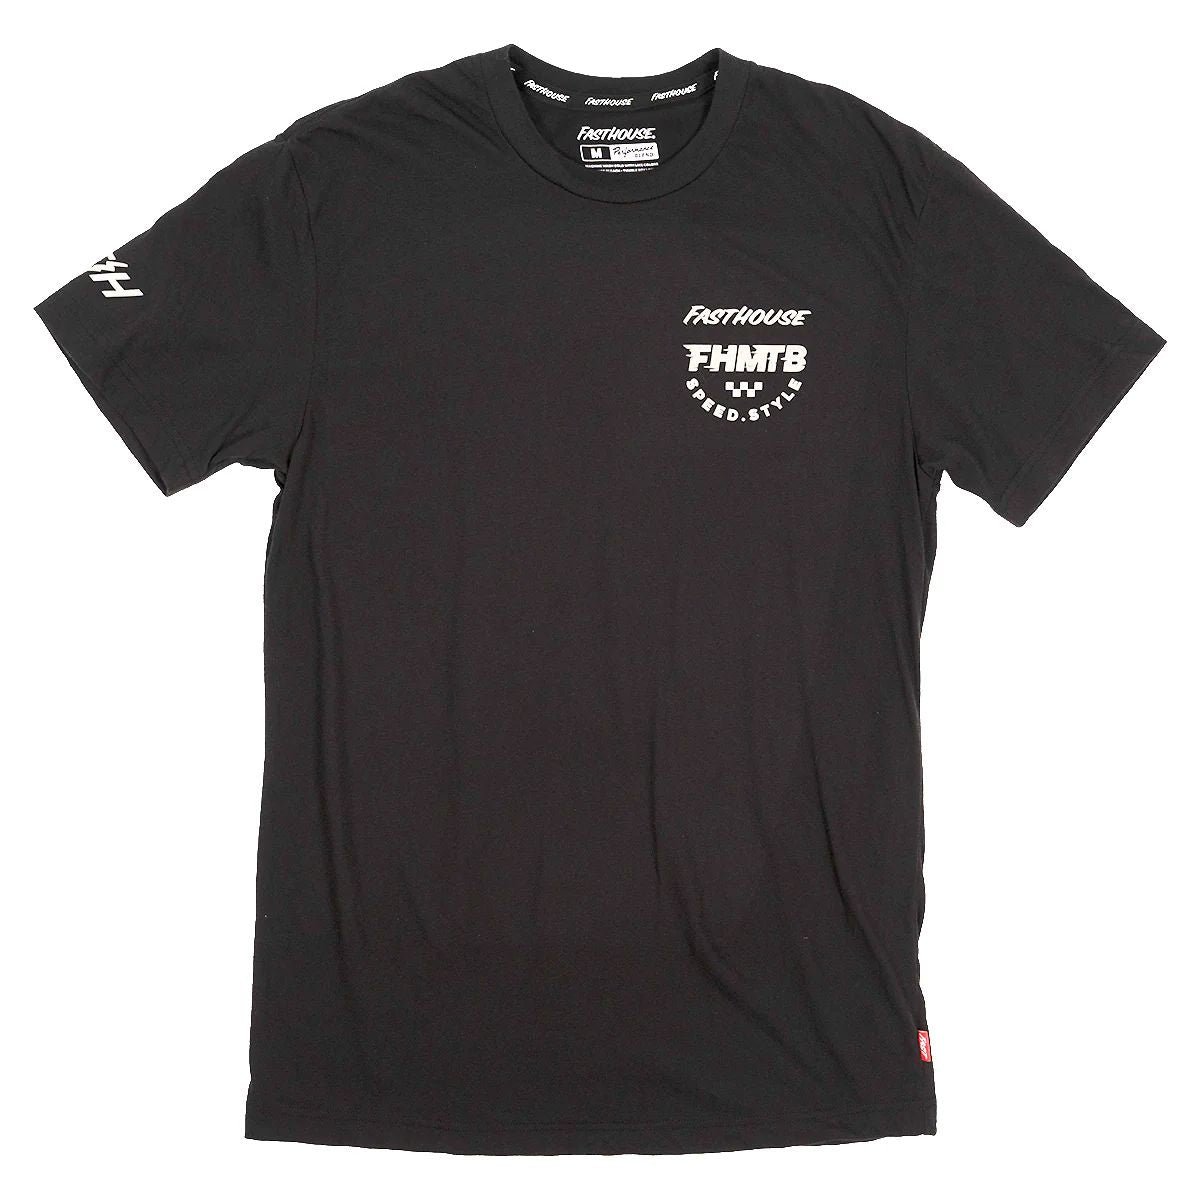 Fasthouse Hierarchy SS Tech Tee Black L - Fasthouse SS Shirts